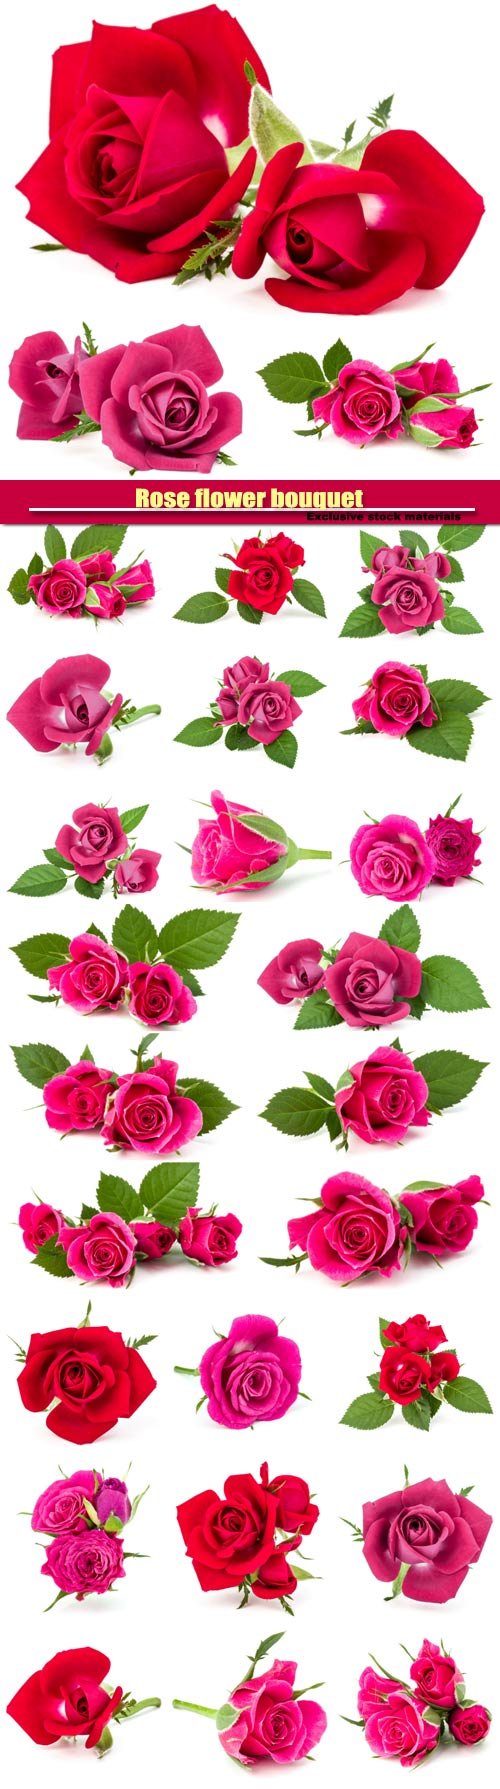 Rose flower bouquet isolated on white background